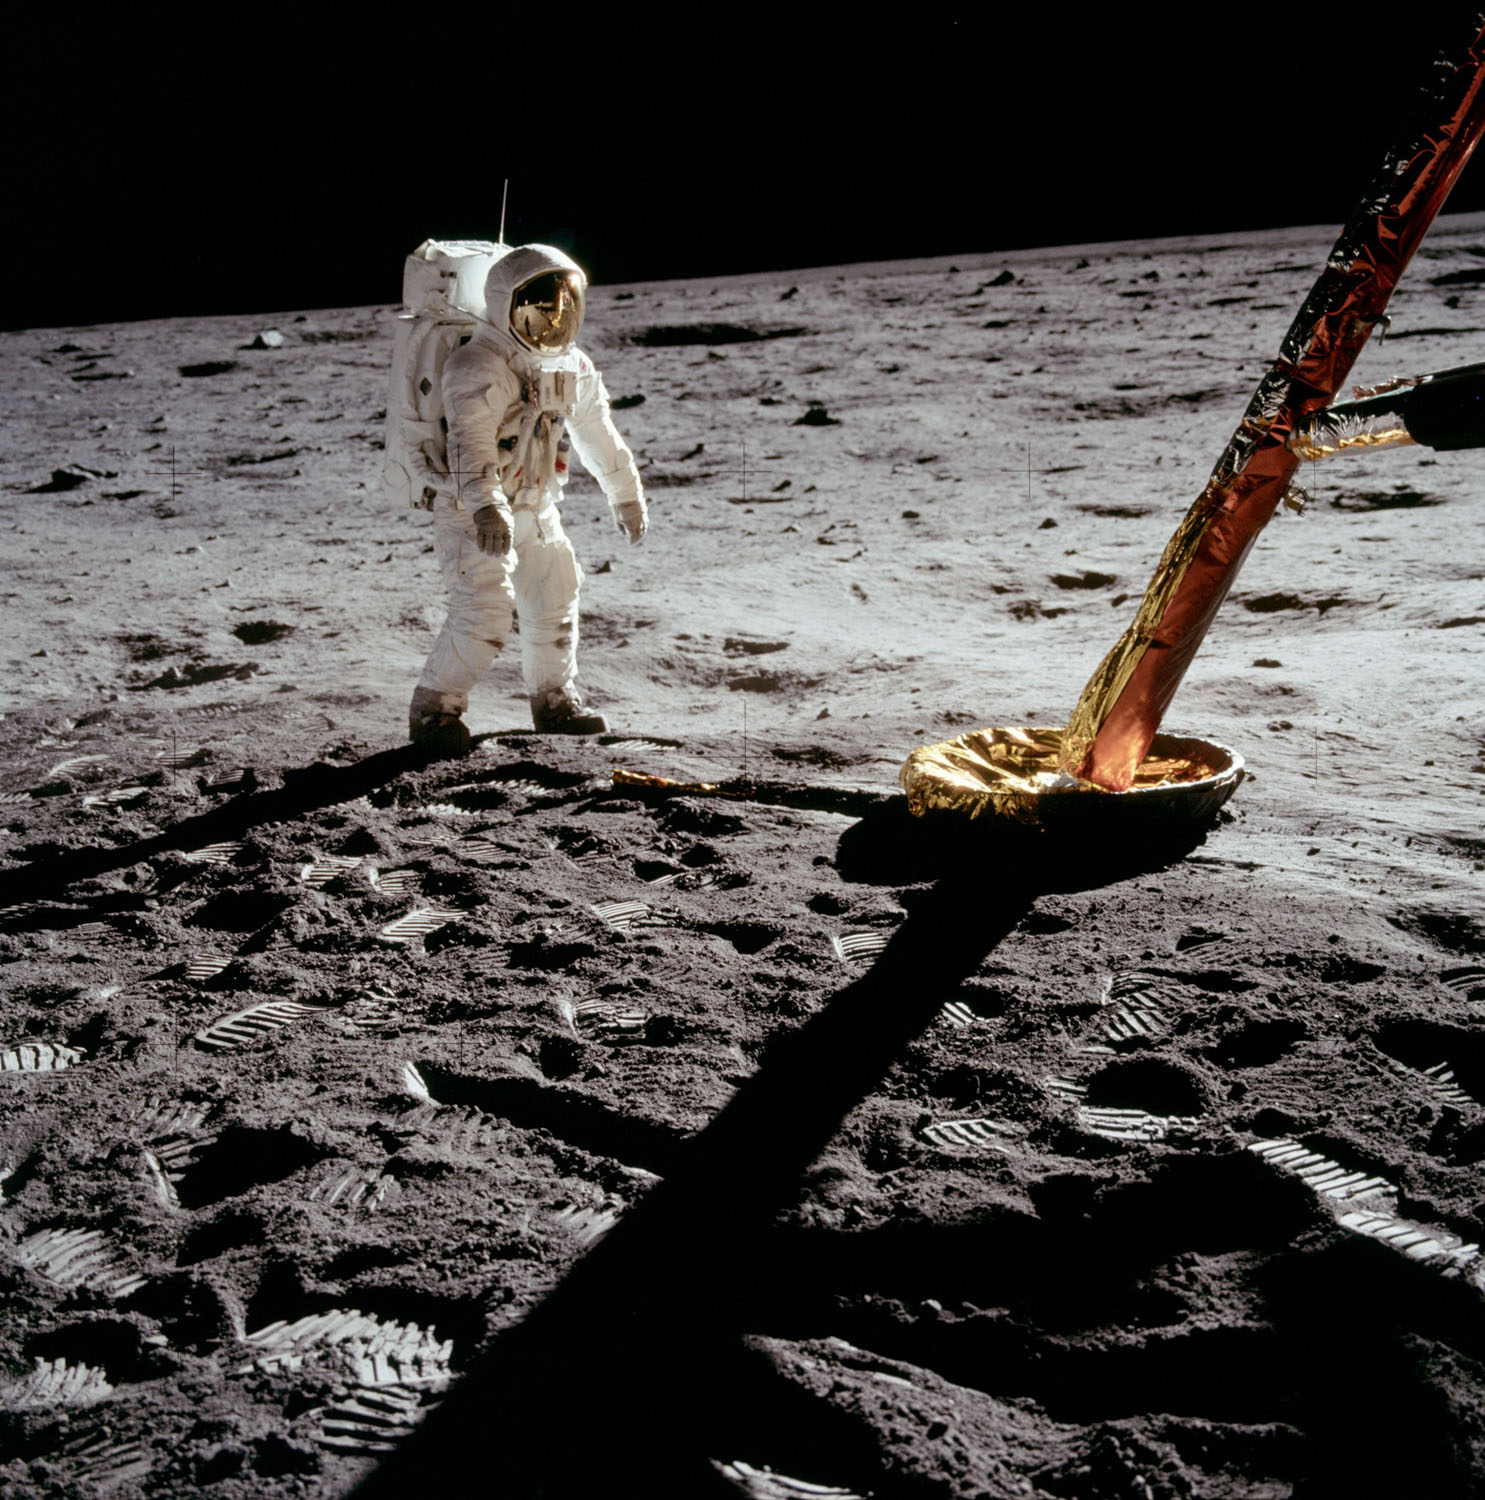 Lunar Excursion Module north-facing strut and footpad (bottom right), with Buzz Aldrin beside. Credit: Neil Armstrong, NASA ID: AS11-40-5902